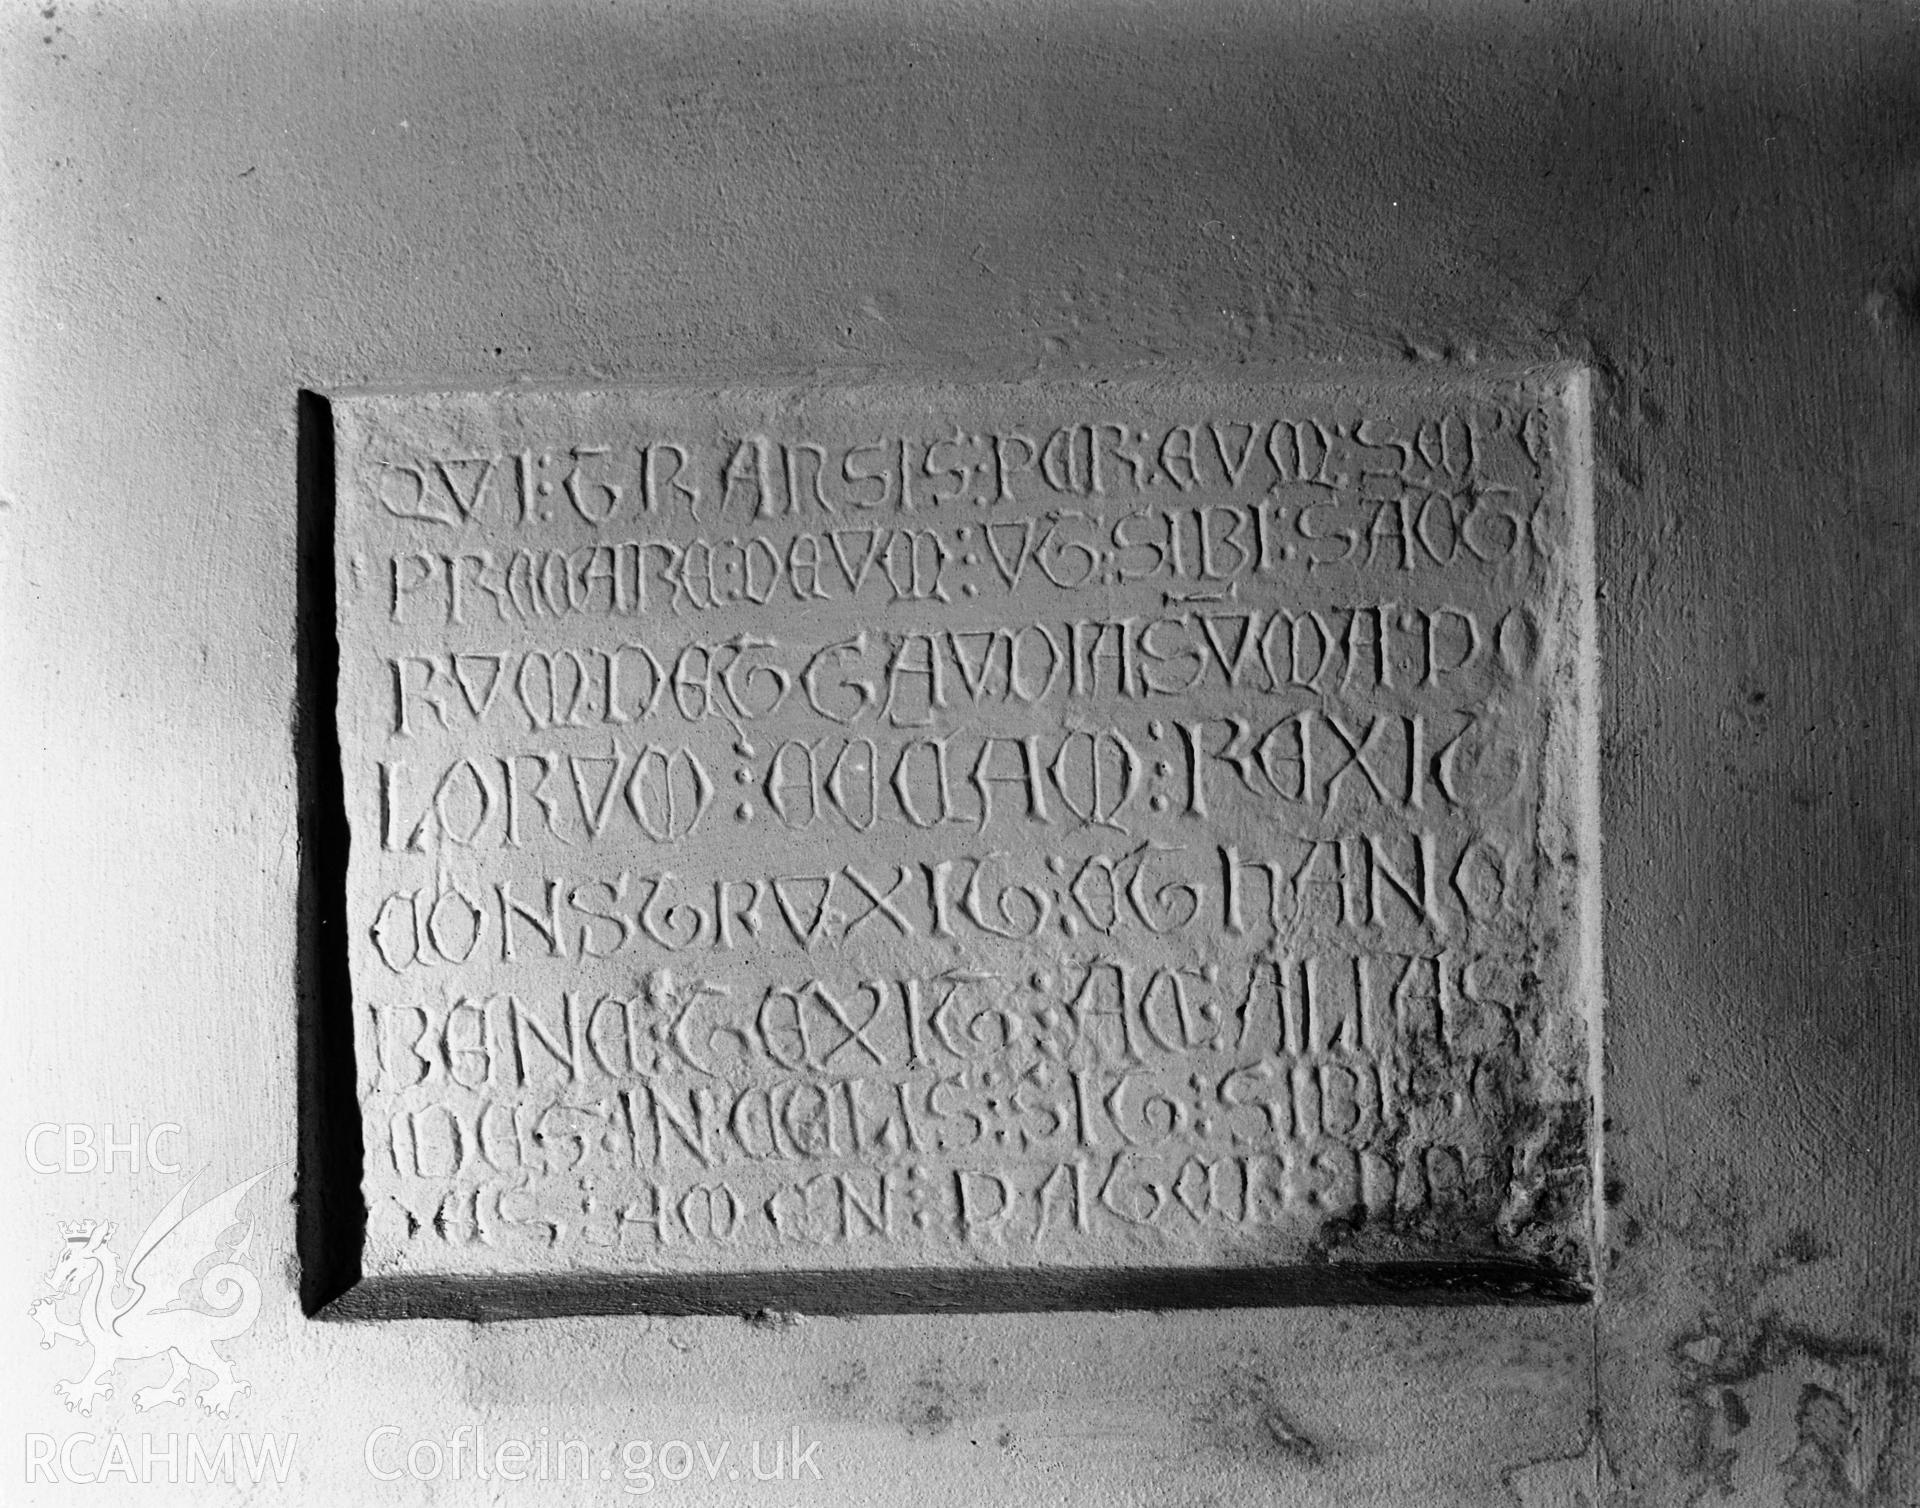 View of inscribed stone in south wall of the nave in Pwllcrochan Church taken in 05.09.1941.